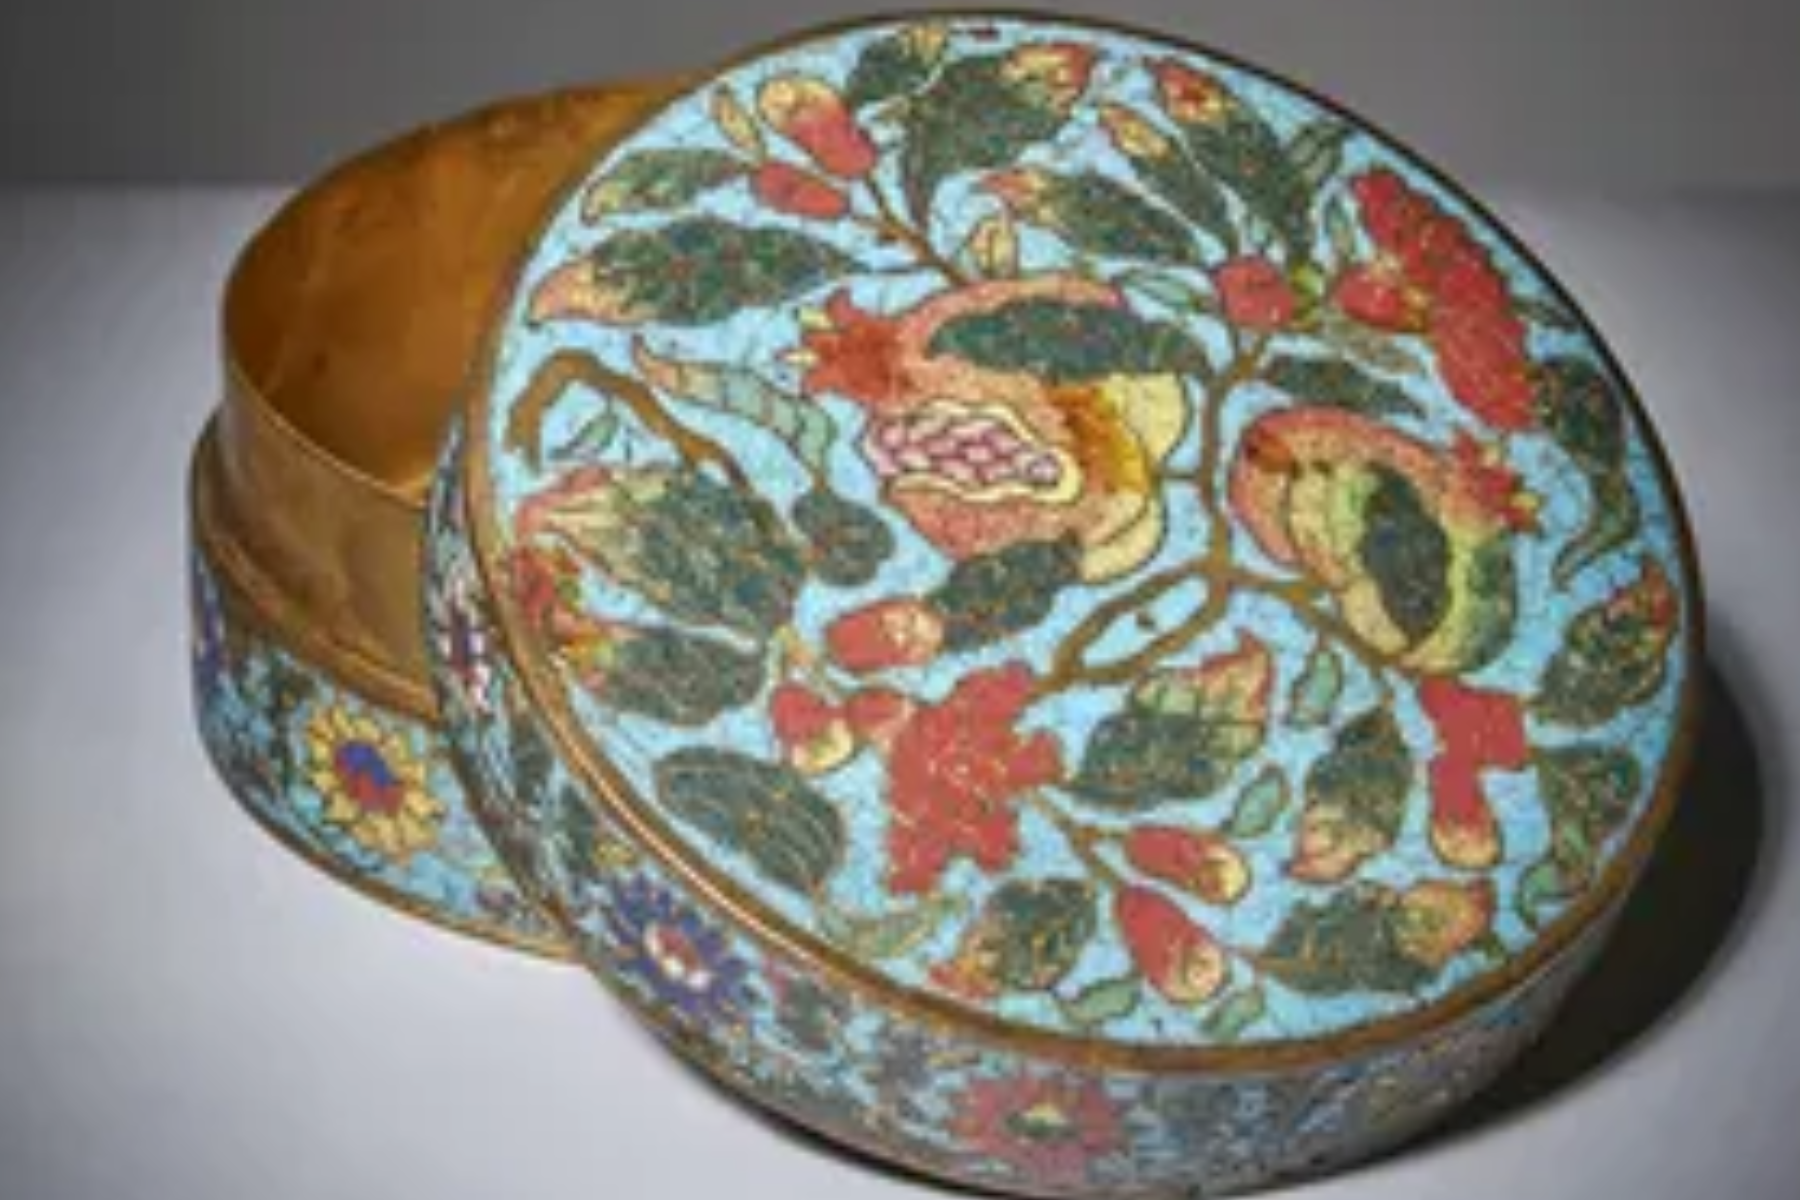 Chinese cloisonné "pomegranate" box and cover from the 15th century Ming period has been discovered in a dust-filled cabinet in the attic of a family home